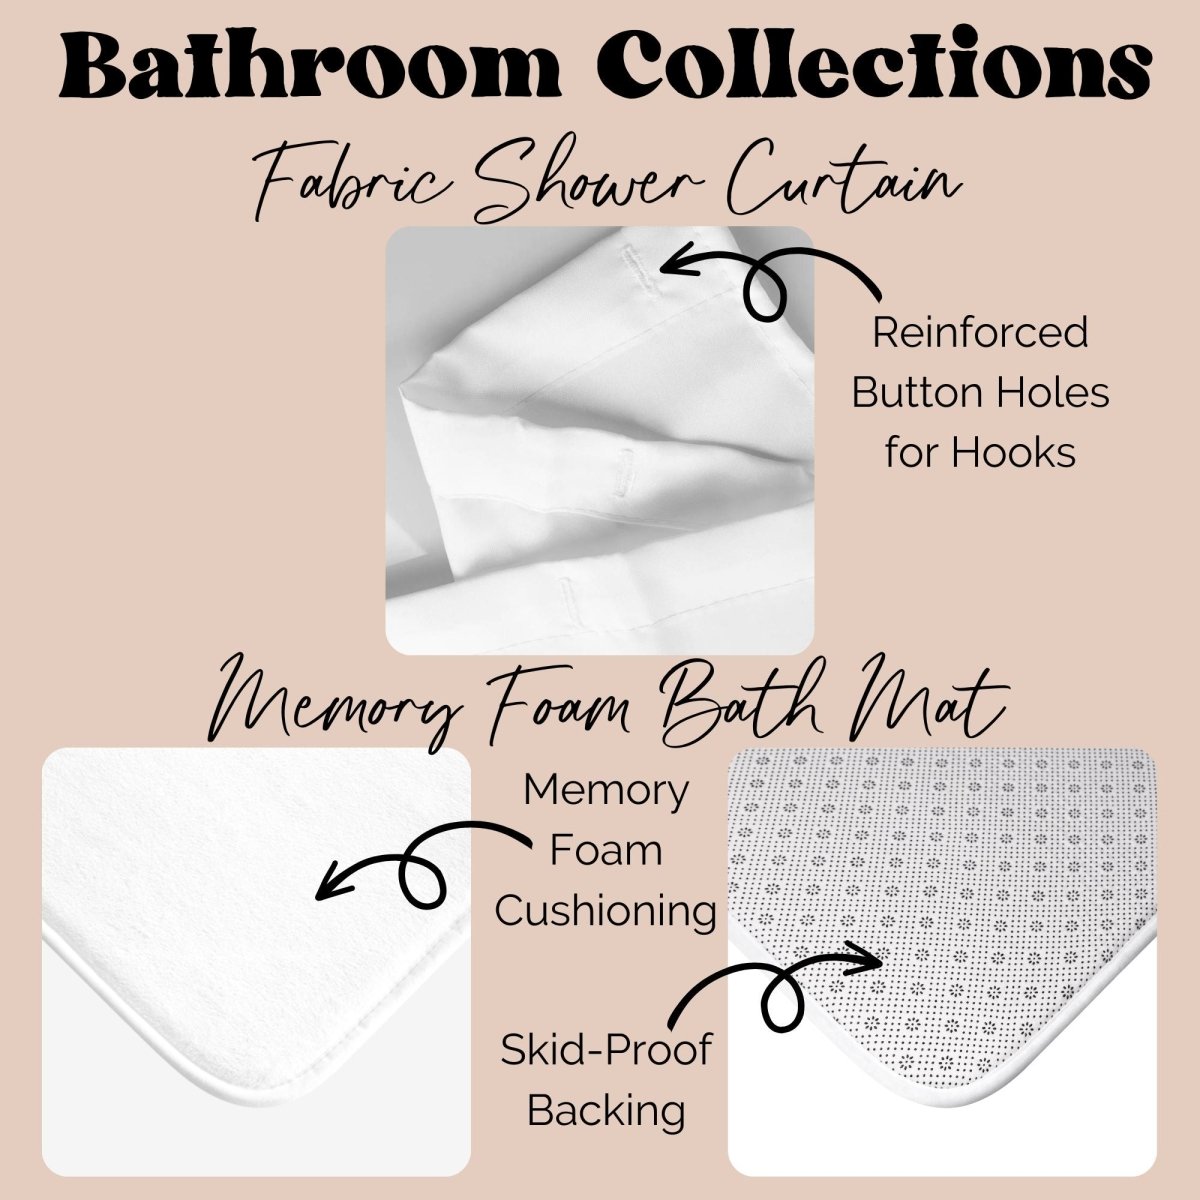 Woodland Meadows Bathroom Collection - gender_girl, text, Theme_Floral